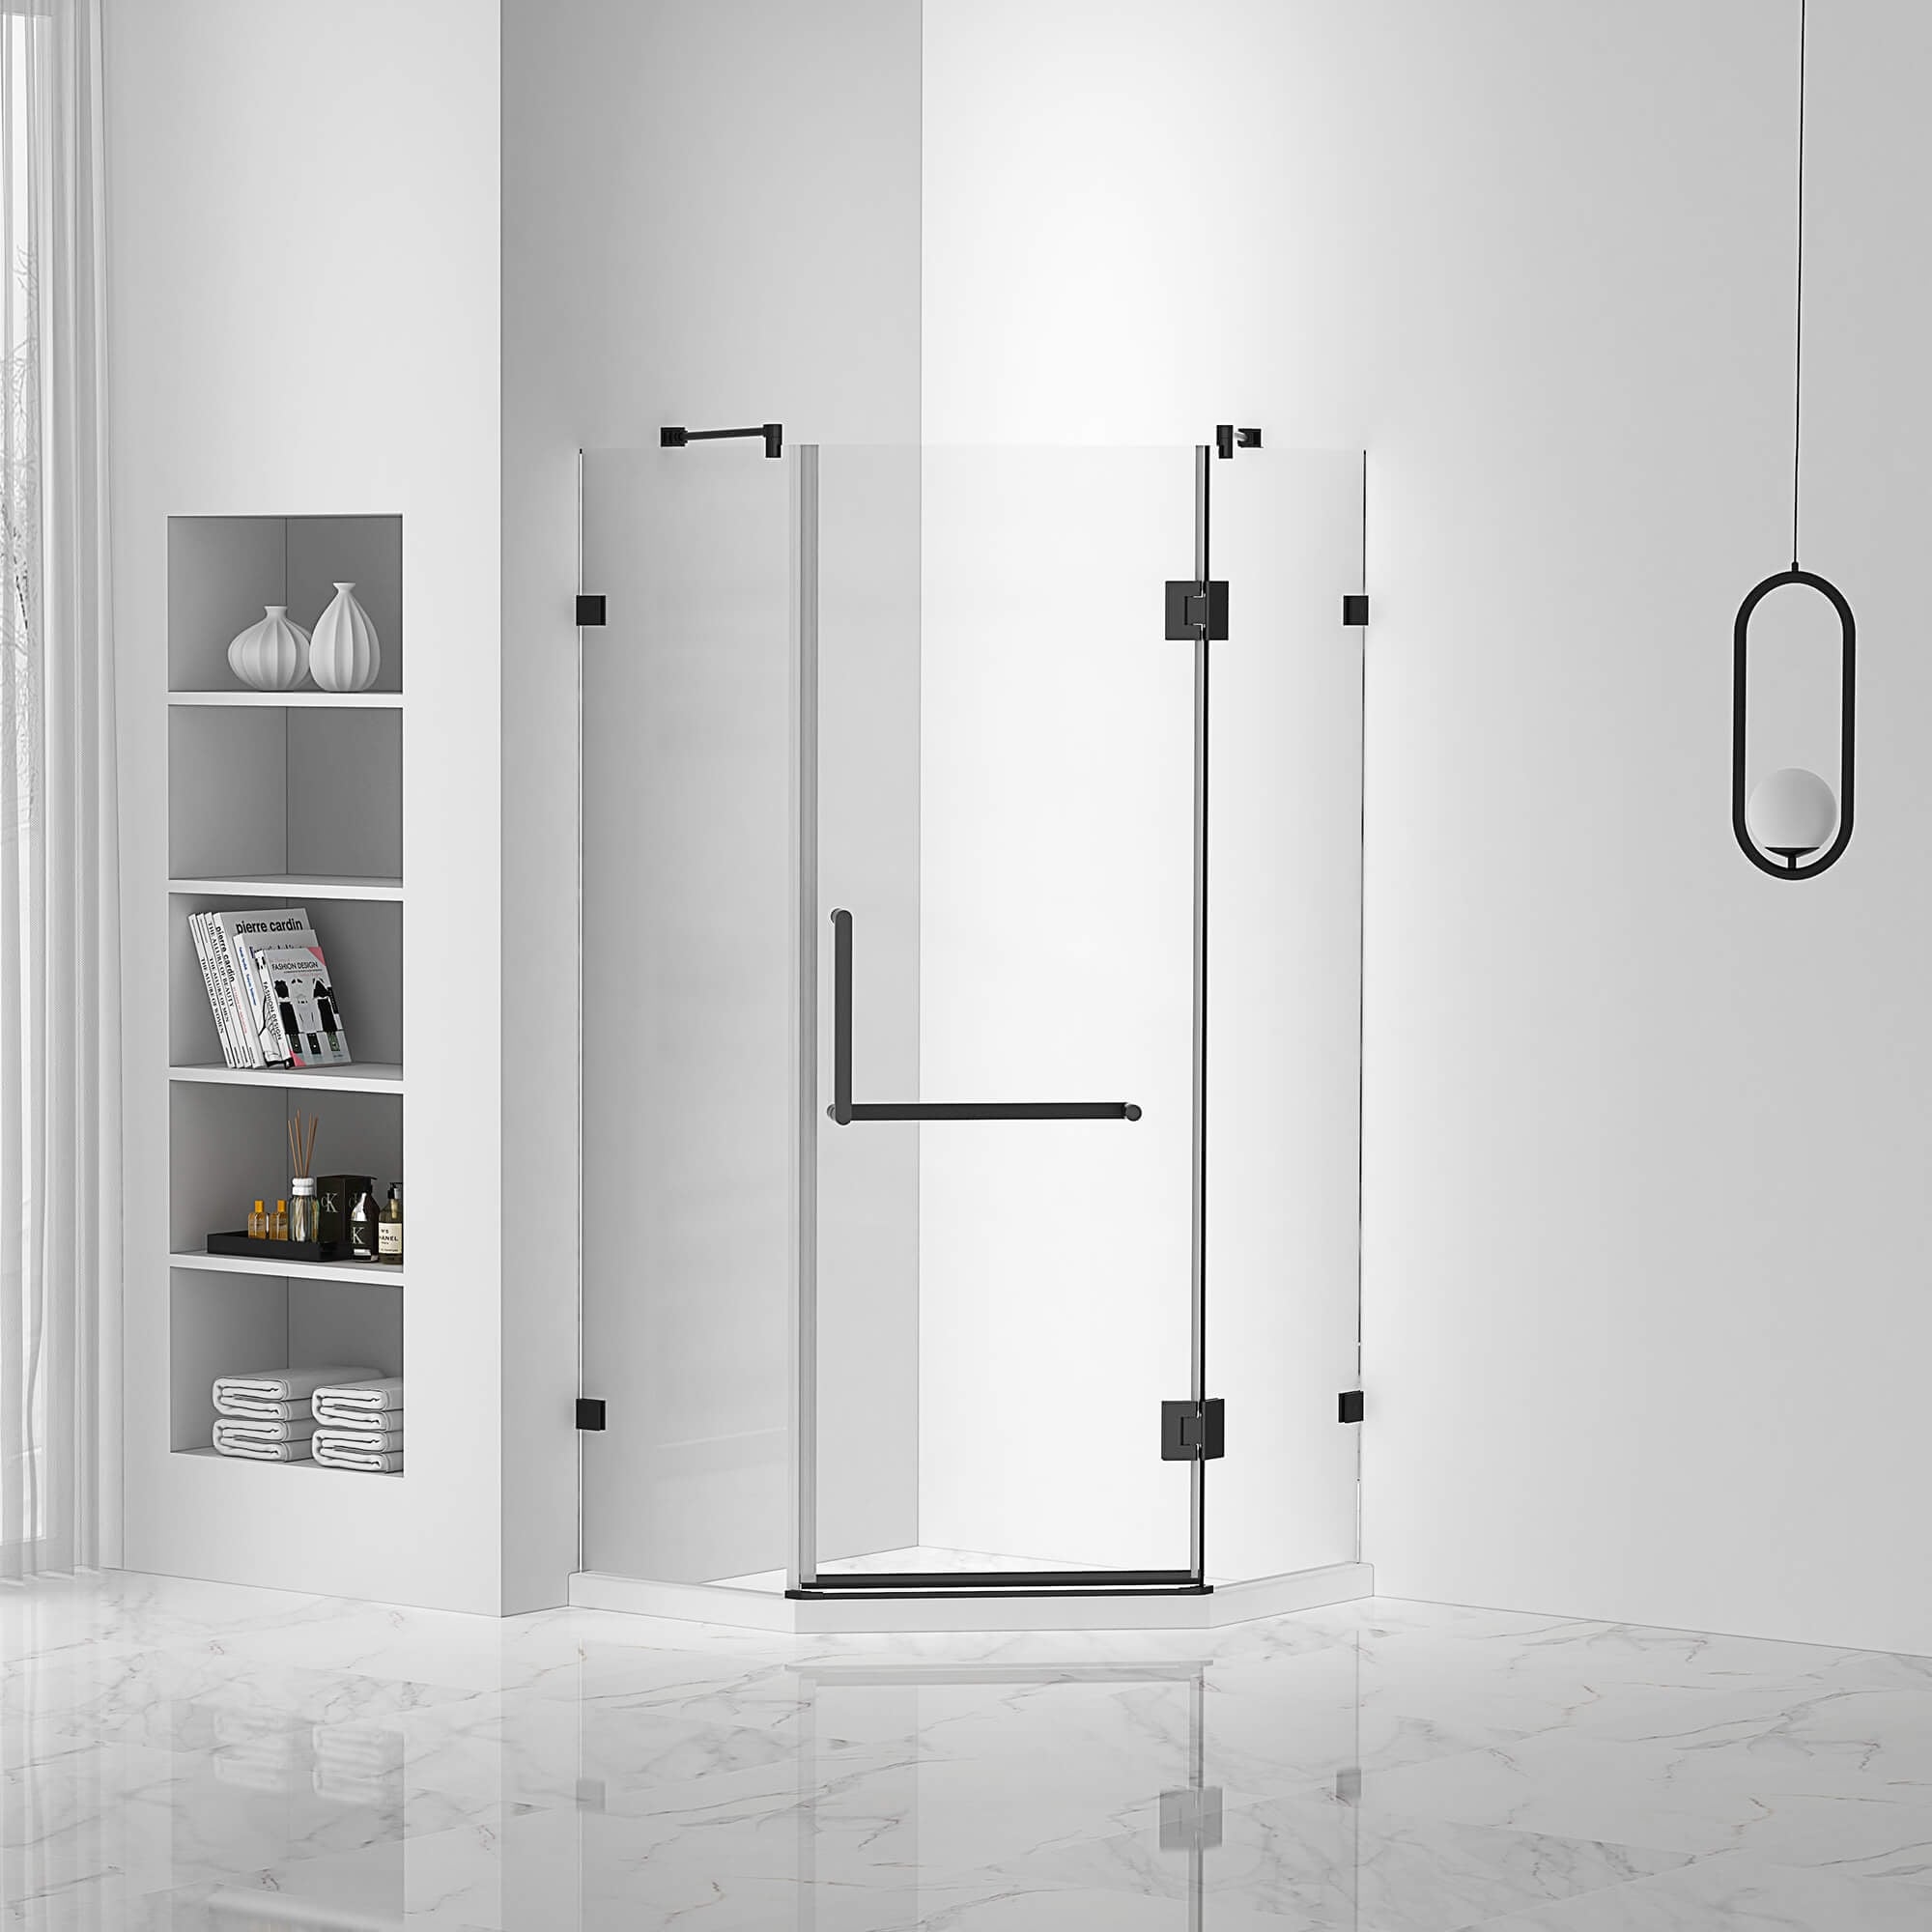 https://ak1.ostkcdn.com/images/products/is/images/direct/adf25367c42945c1e5264e896310b15e39548325/Fine-Fixtures-Shower-Enclosure-Neo-Angle-Frameless-Tempered-Glass.jpg